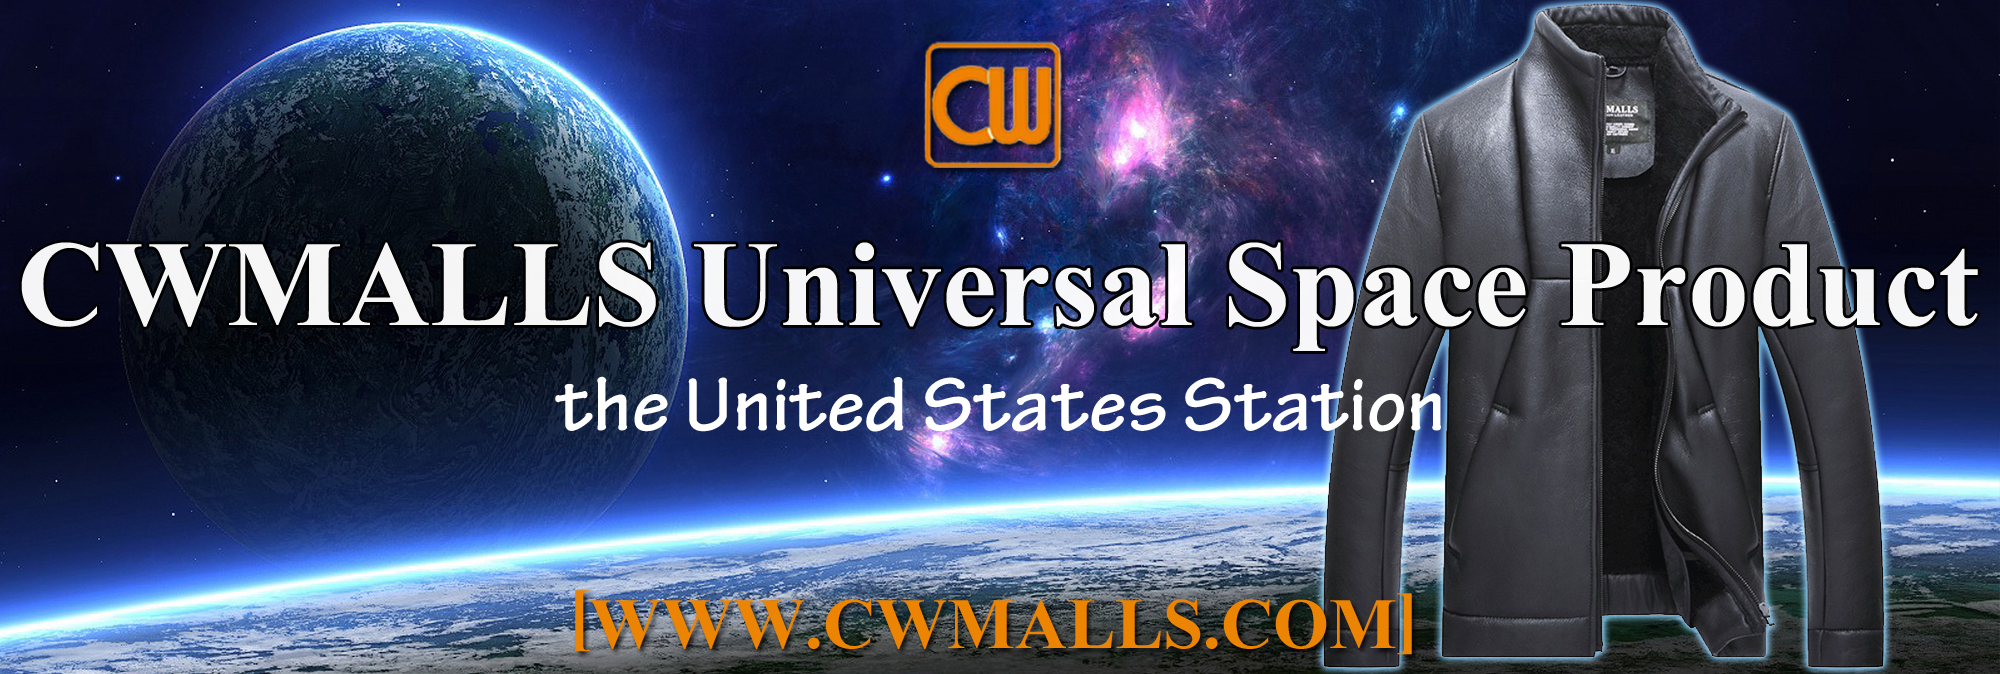 CWMALLS Universal Space Product- the United States Station